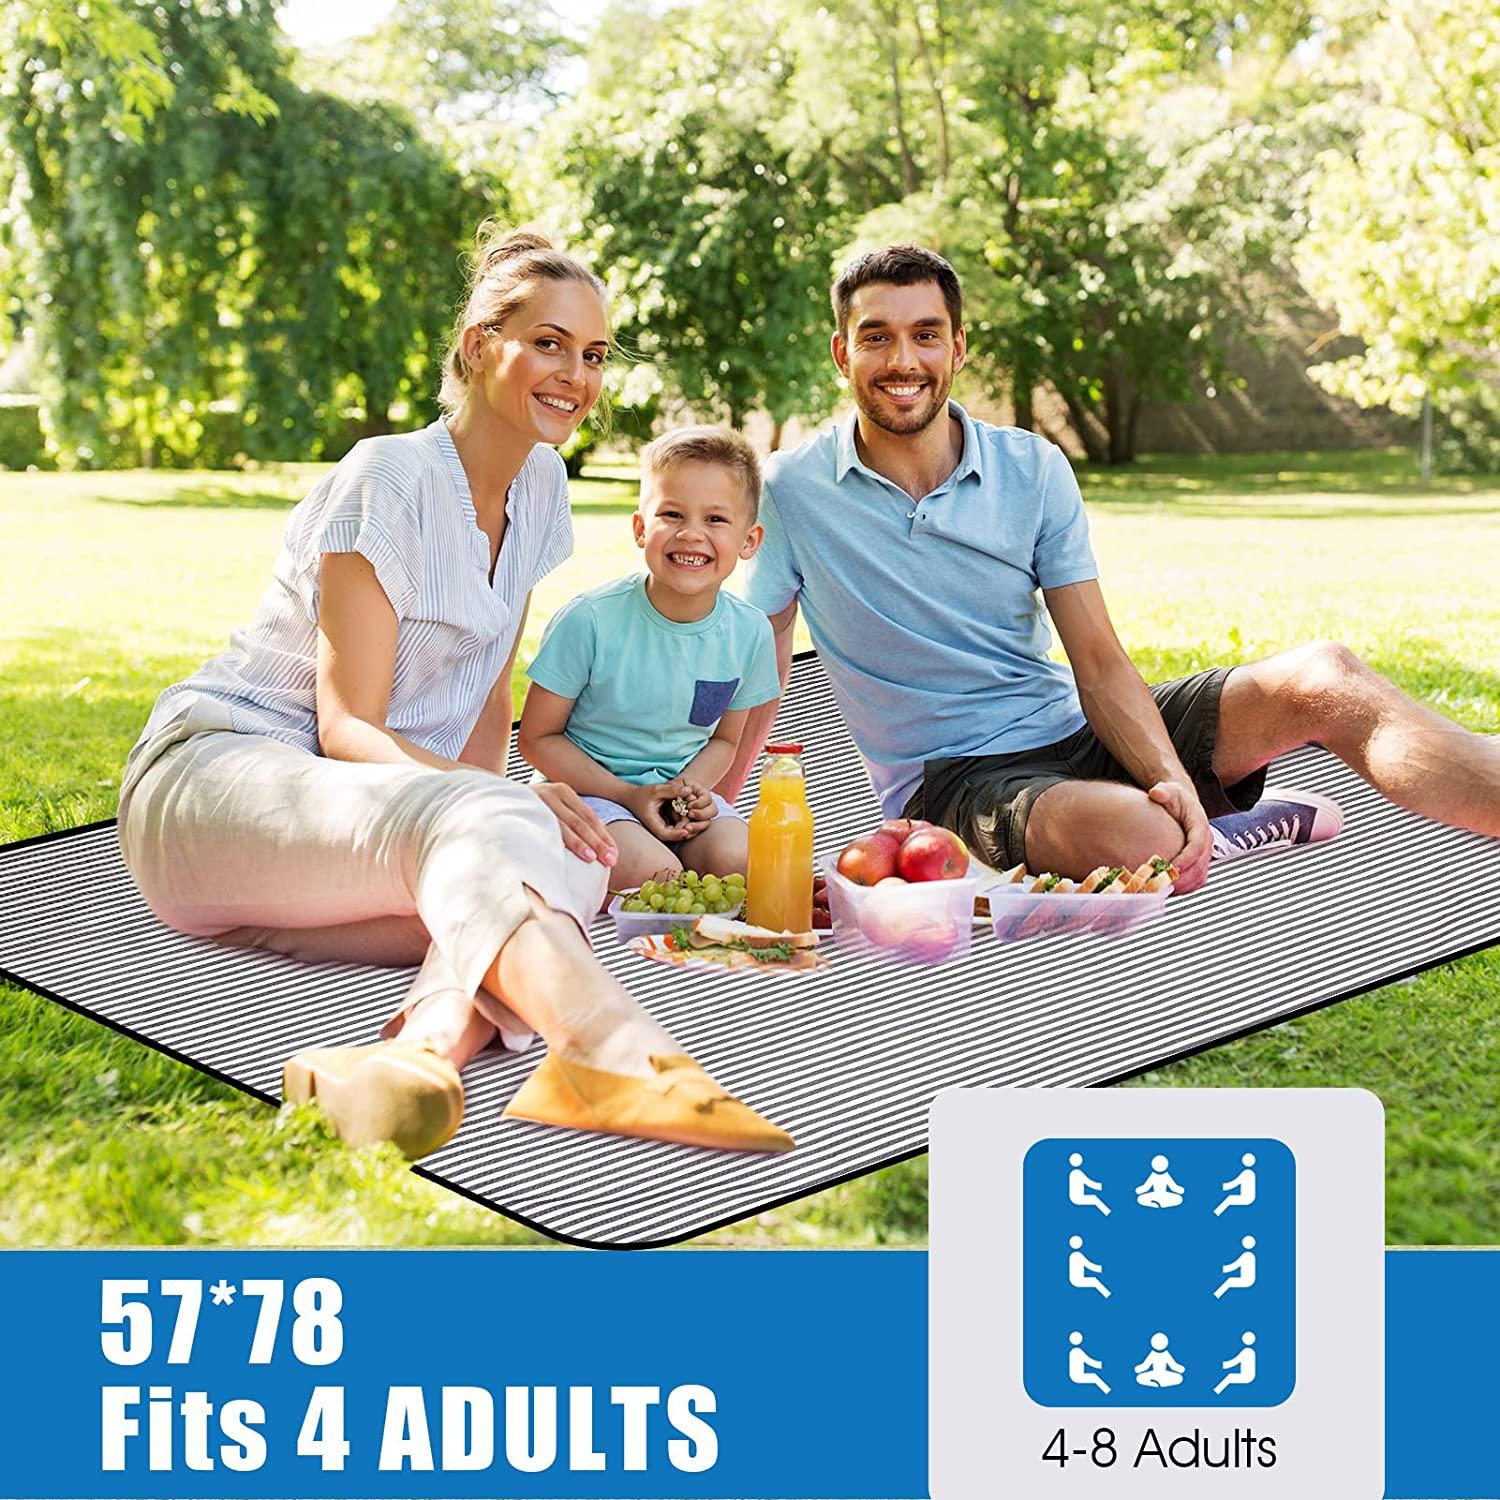 Gropki Outdoor Multifunctional Foldable Picnic Blanket Is Suitable for Camping Barbecues, Grass Parties and Folding Tents, Size 80x 80 1pcs.